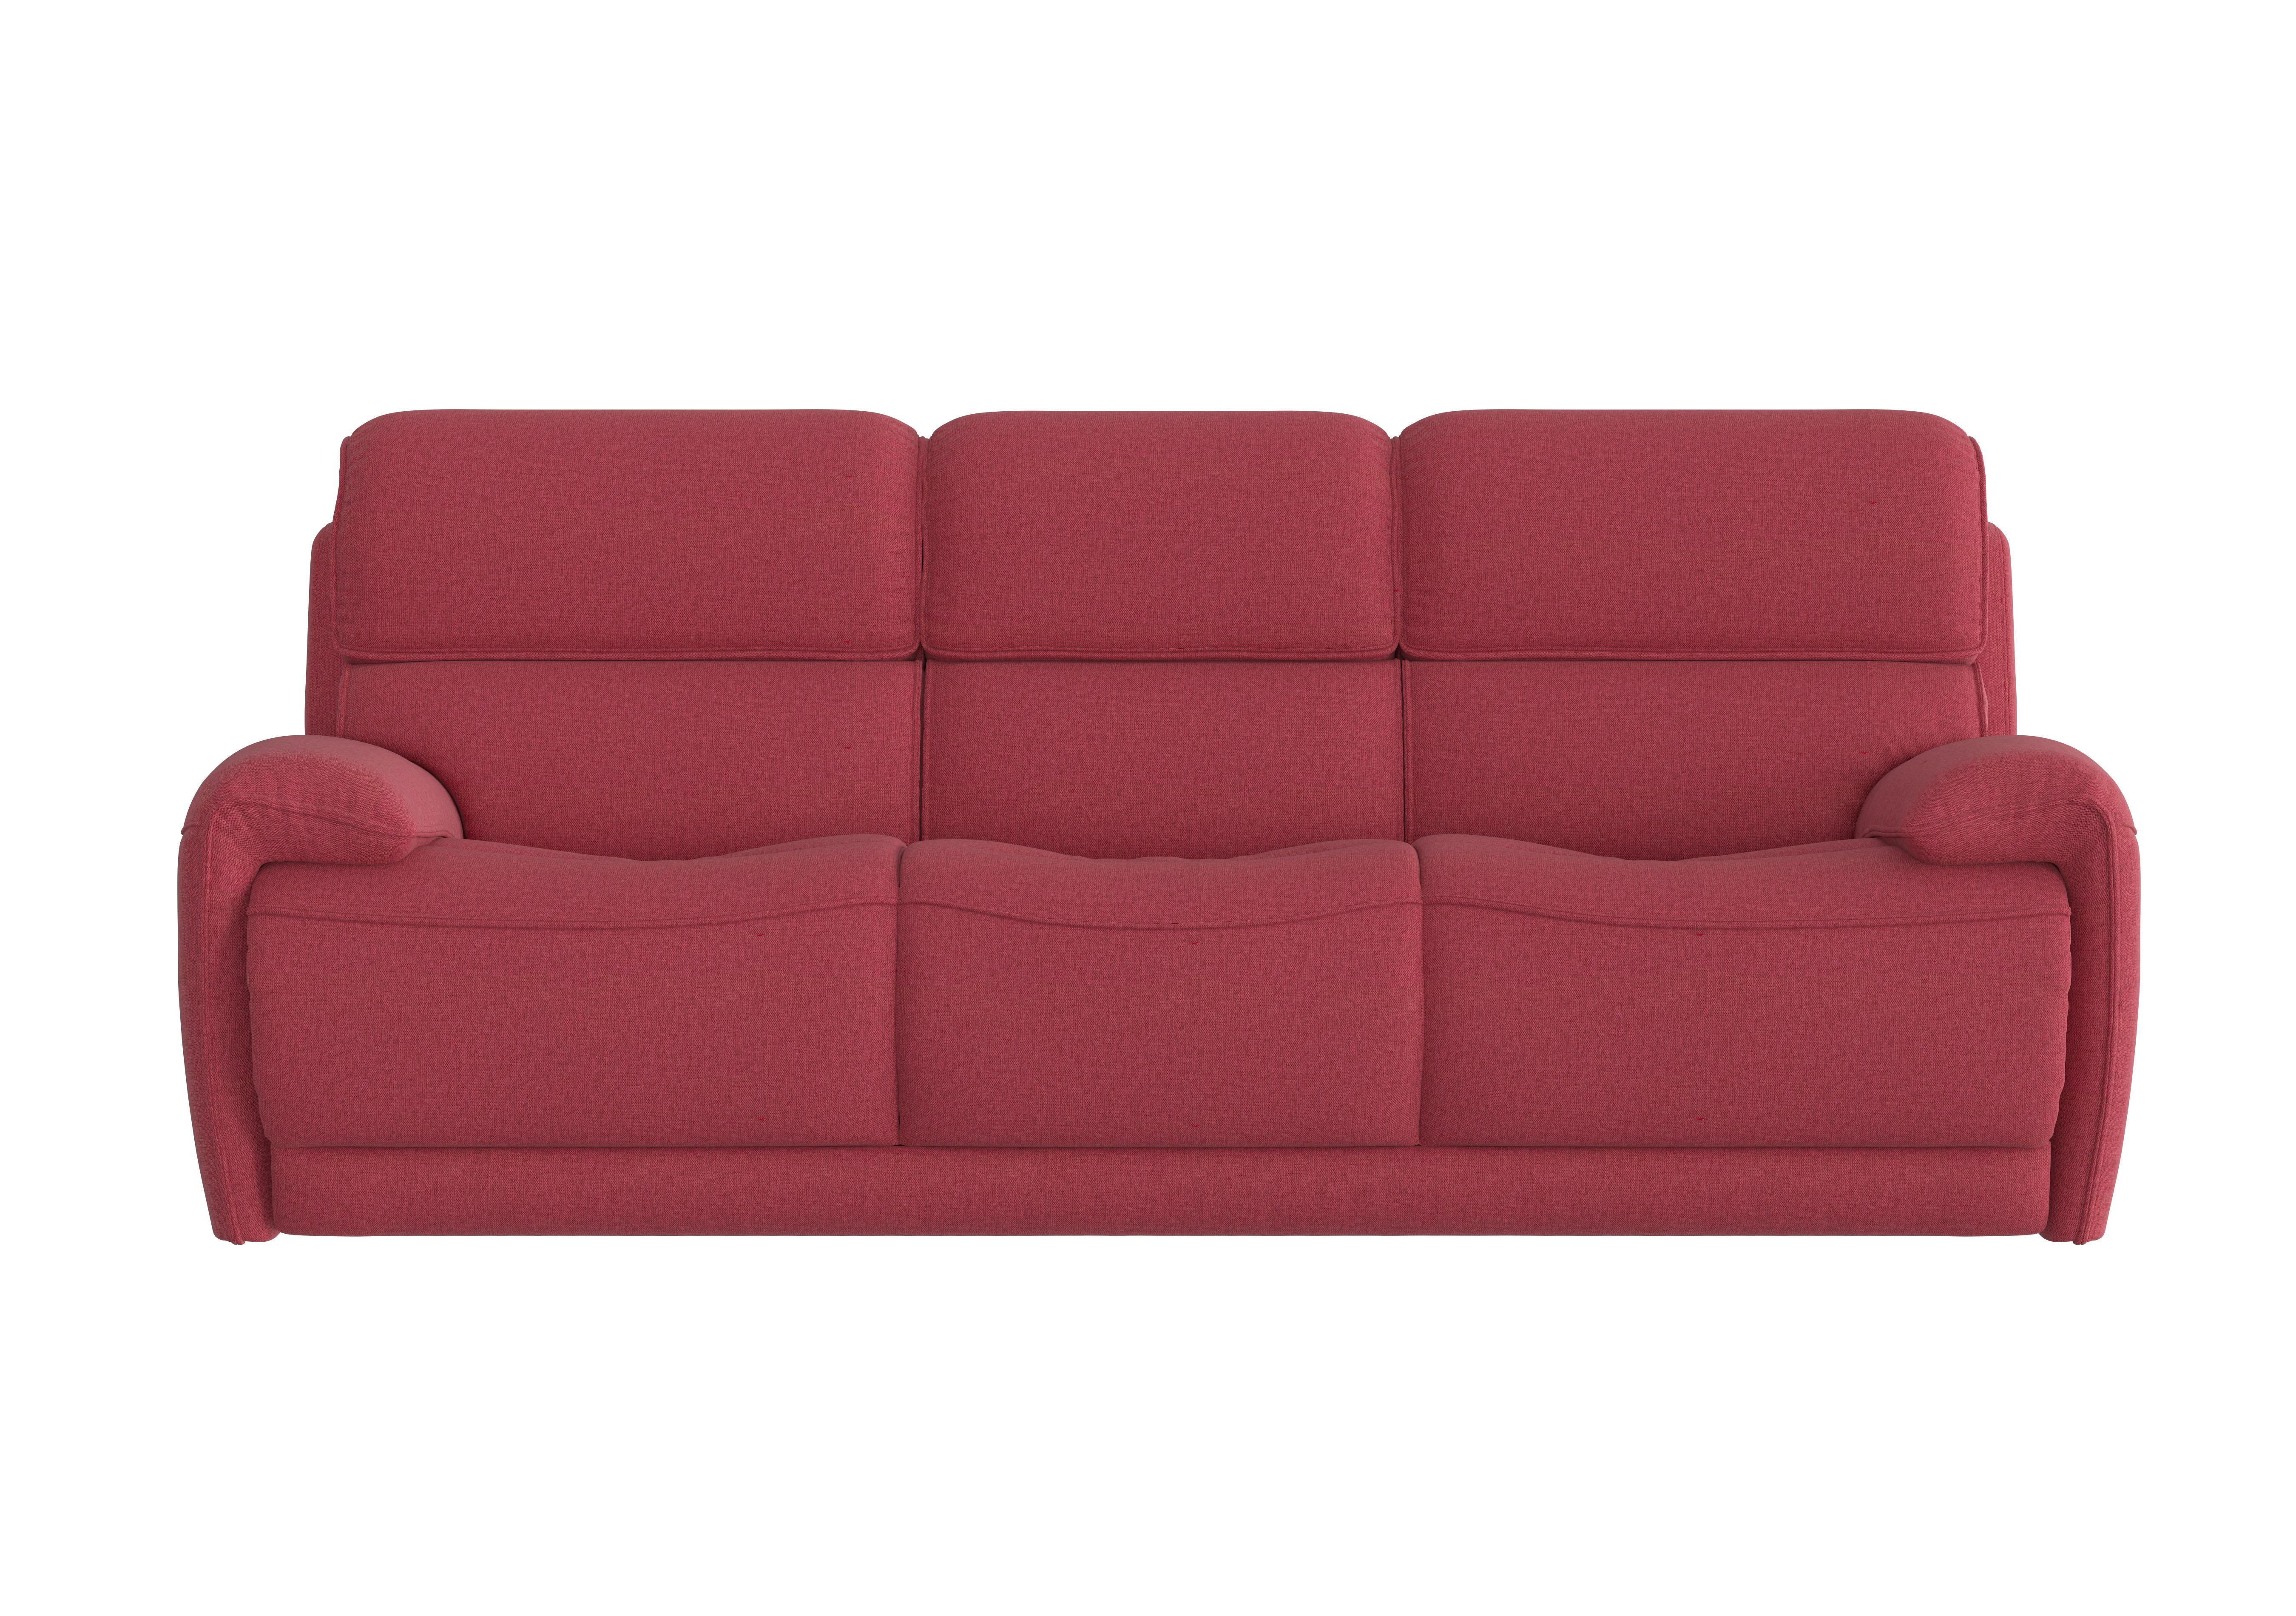 Link 3 Seater Fabric Sofa in Fab-Blt-R29 Red on Furniture Village